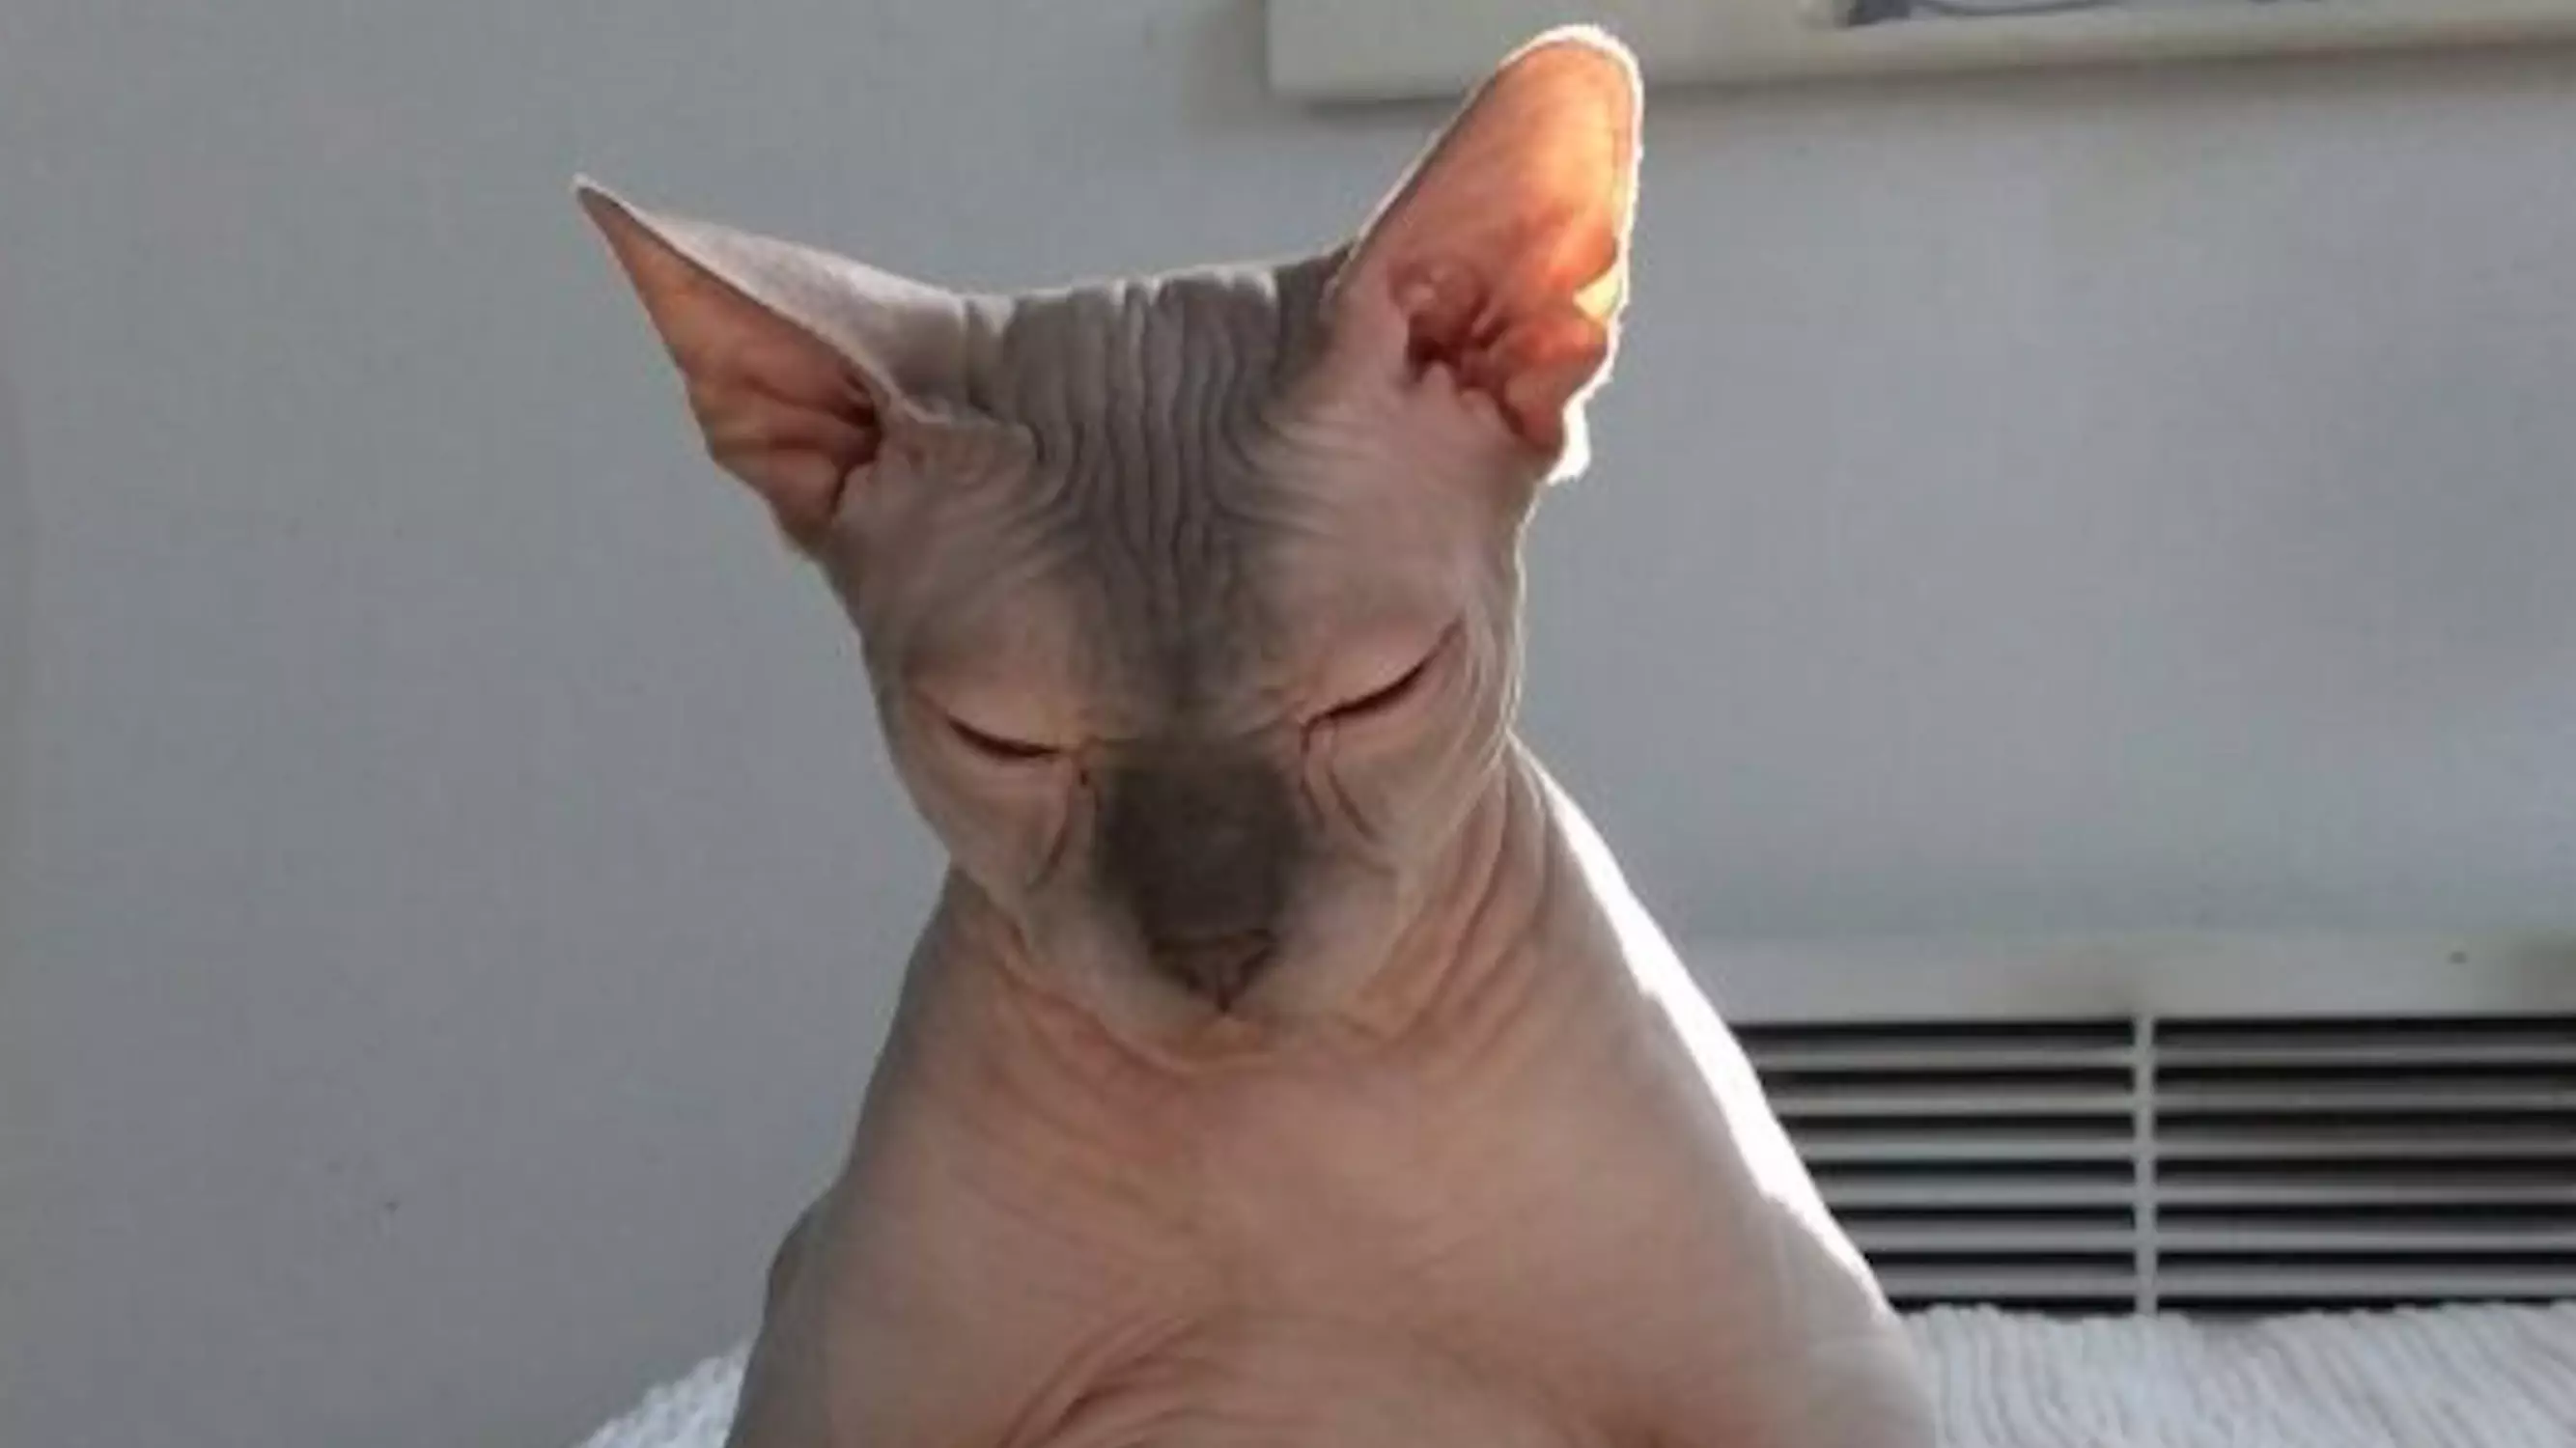 Footage Of Big-Bellied Sphynx Cat Sat Around House Like A Human Goes Viral